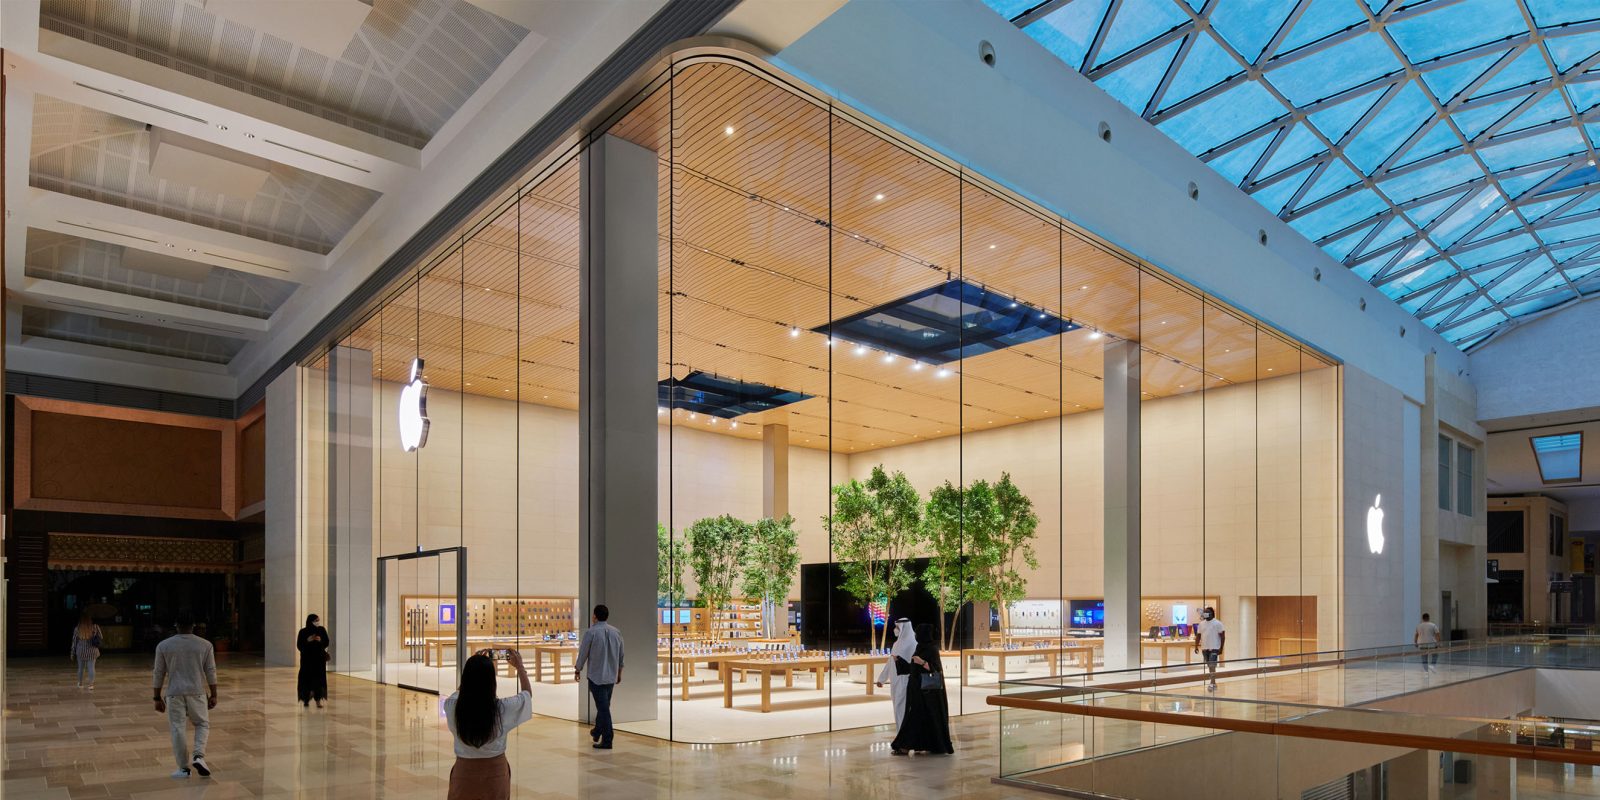 Latest Apple Store opens in Abu Dhabi